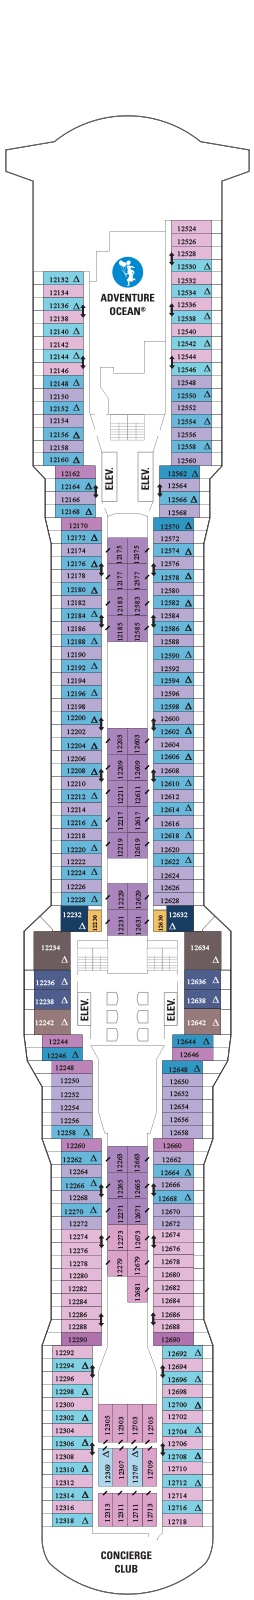 Quantum of the Seas Deck plan & cabin plan from 07/10/2019 until 25/04/2020